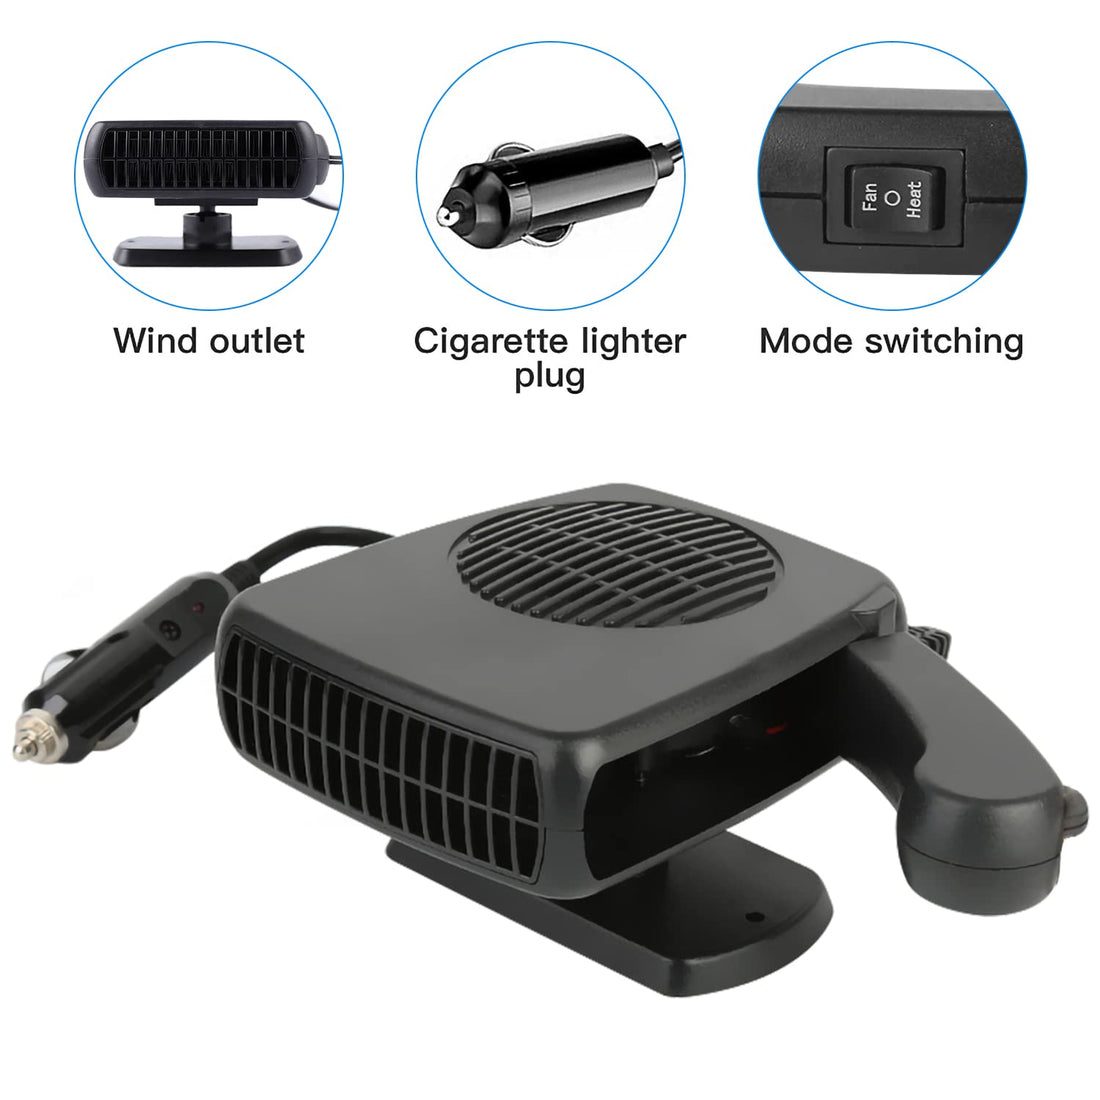 Car Heater, Portable Car Defroster Defogger Heater 2 in 1 Heating/Cooling Handheld Car Heater for Quick Heating Defrosting for Automobile Windscreen Winter